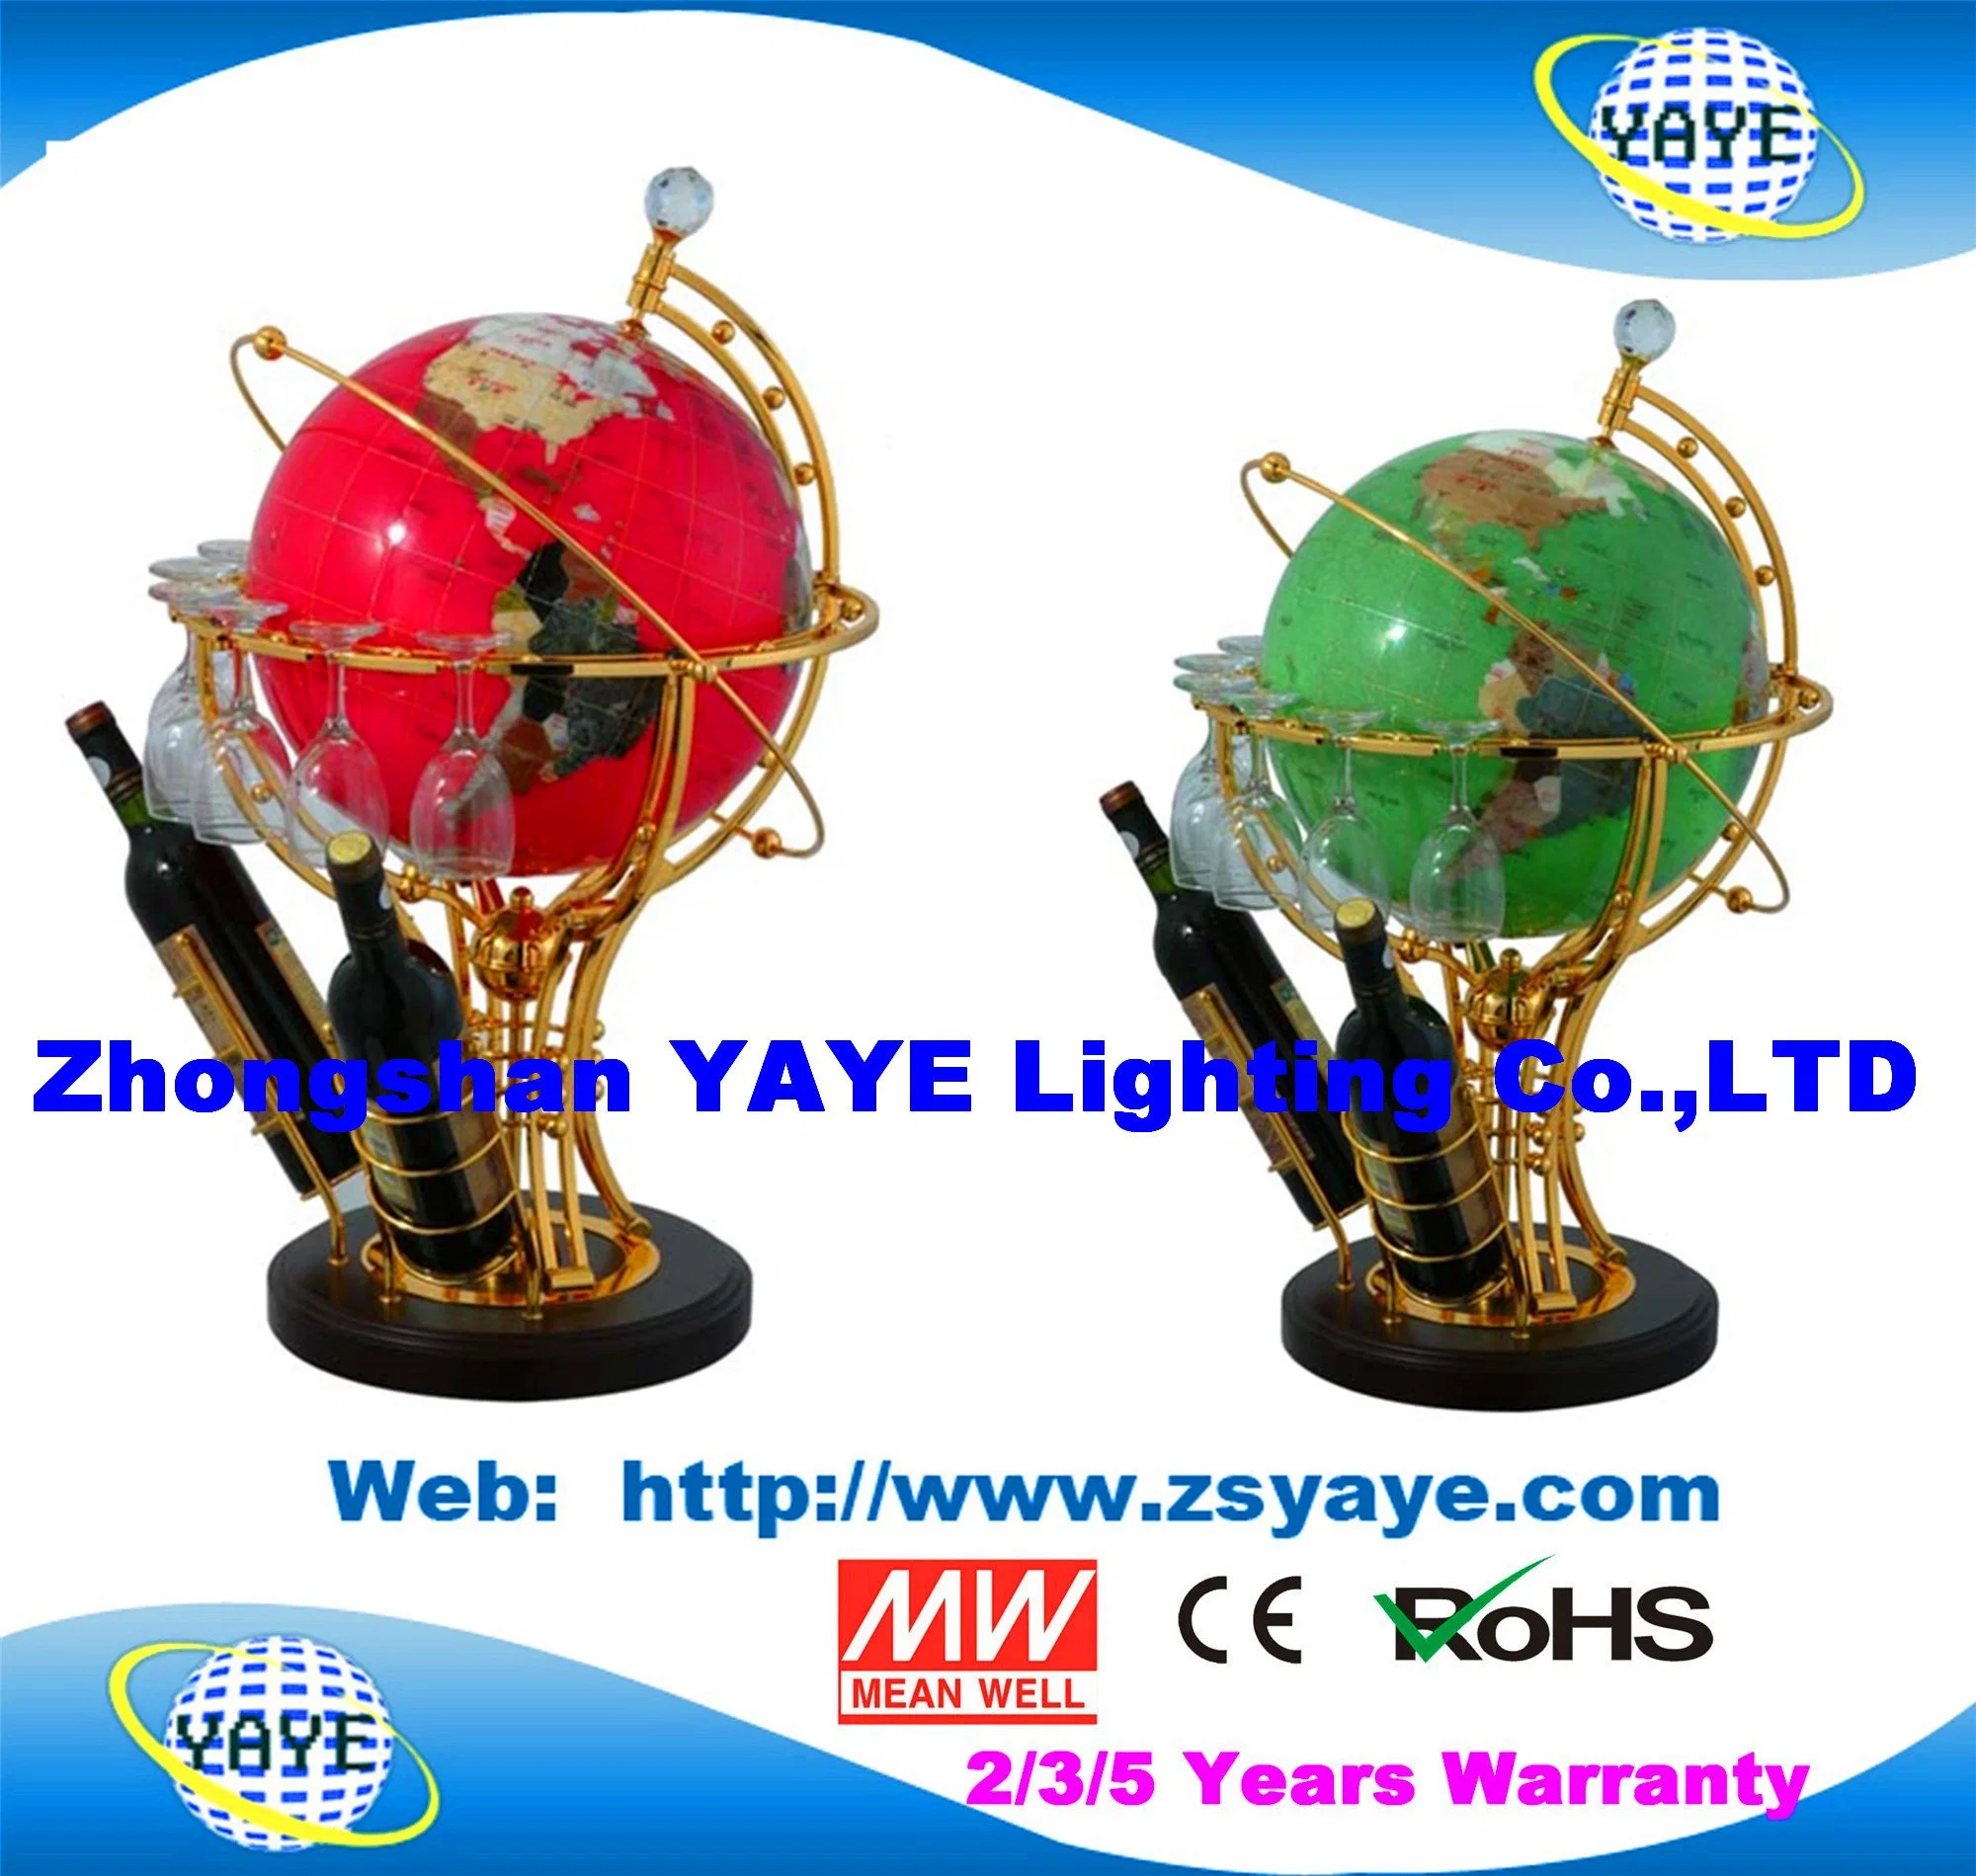 Yaye 18 Hot Sell Globe Size: 220mm/330mm Lighted Globes /Home /Office Decoration with Input Voltage 110V/220V-265V /World Map /English Words